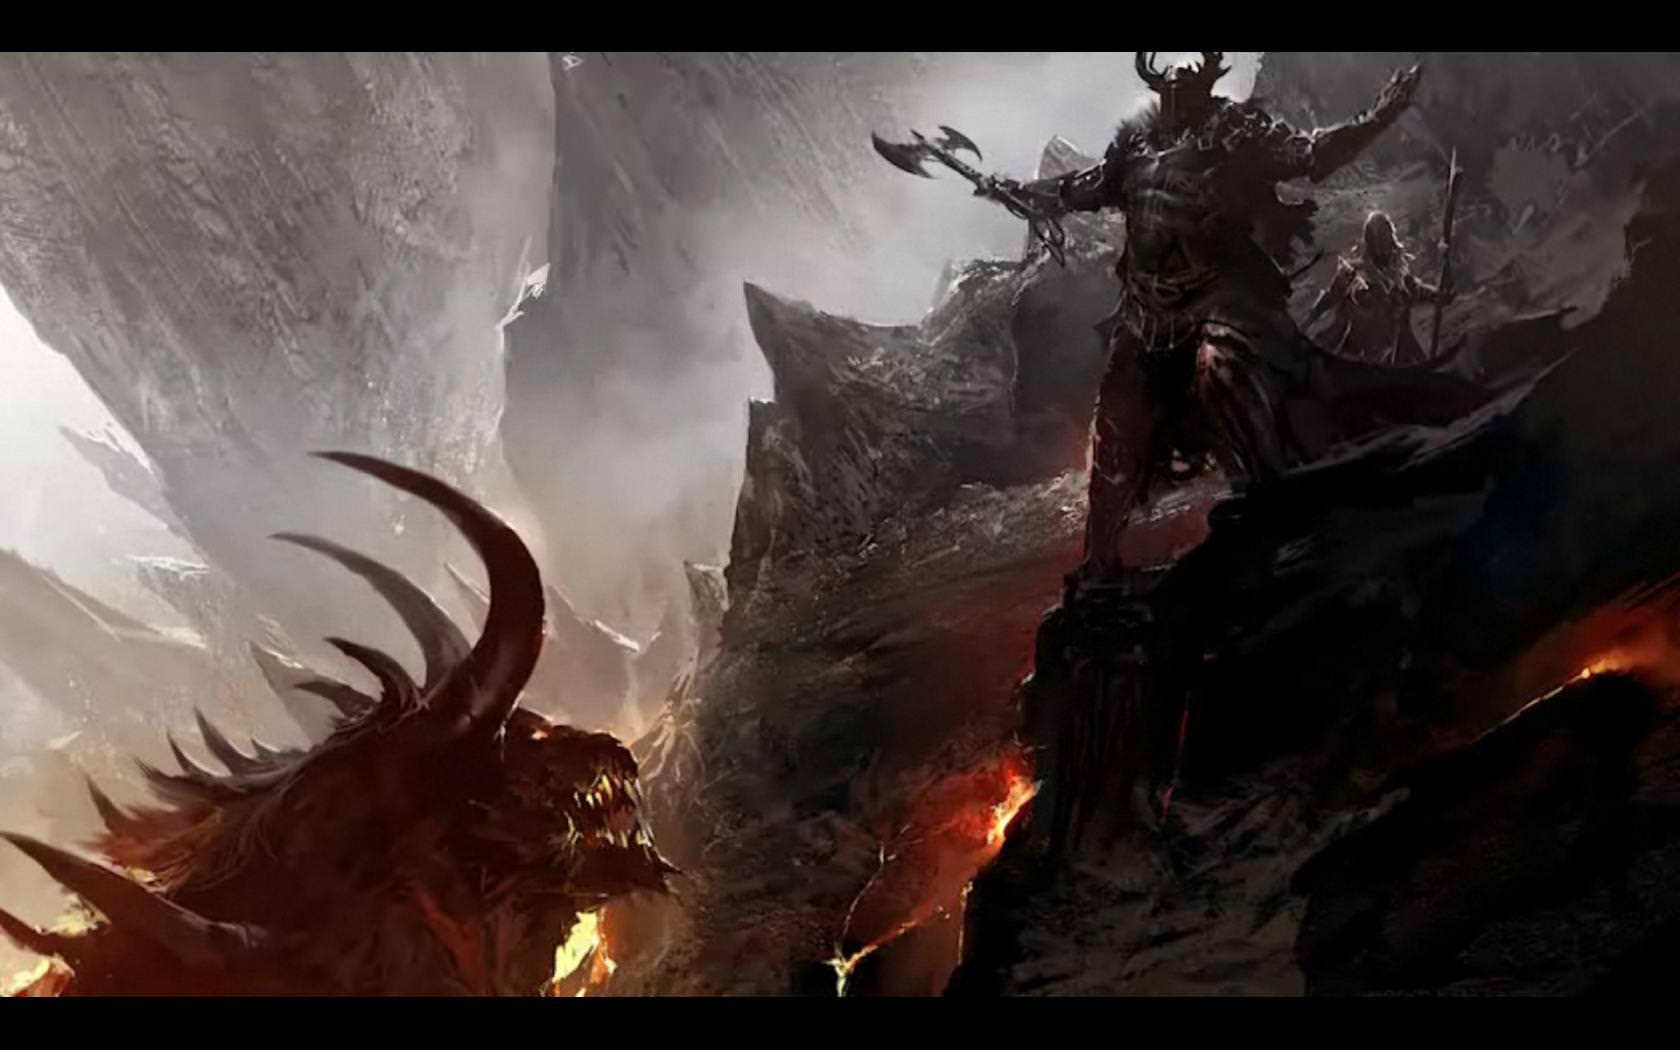 1680 x 1050 · jpeg - Demon Lord Wallpapers - Wallpaper Cave